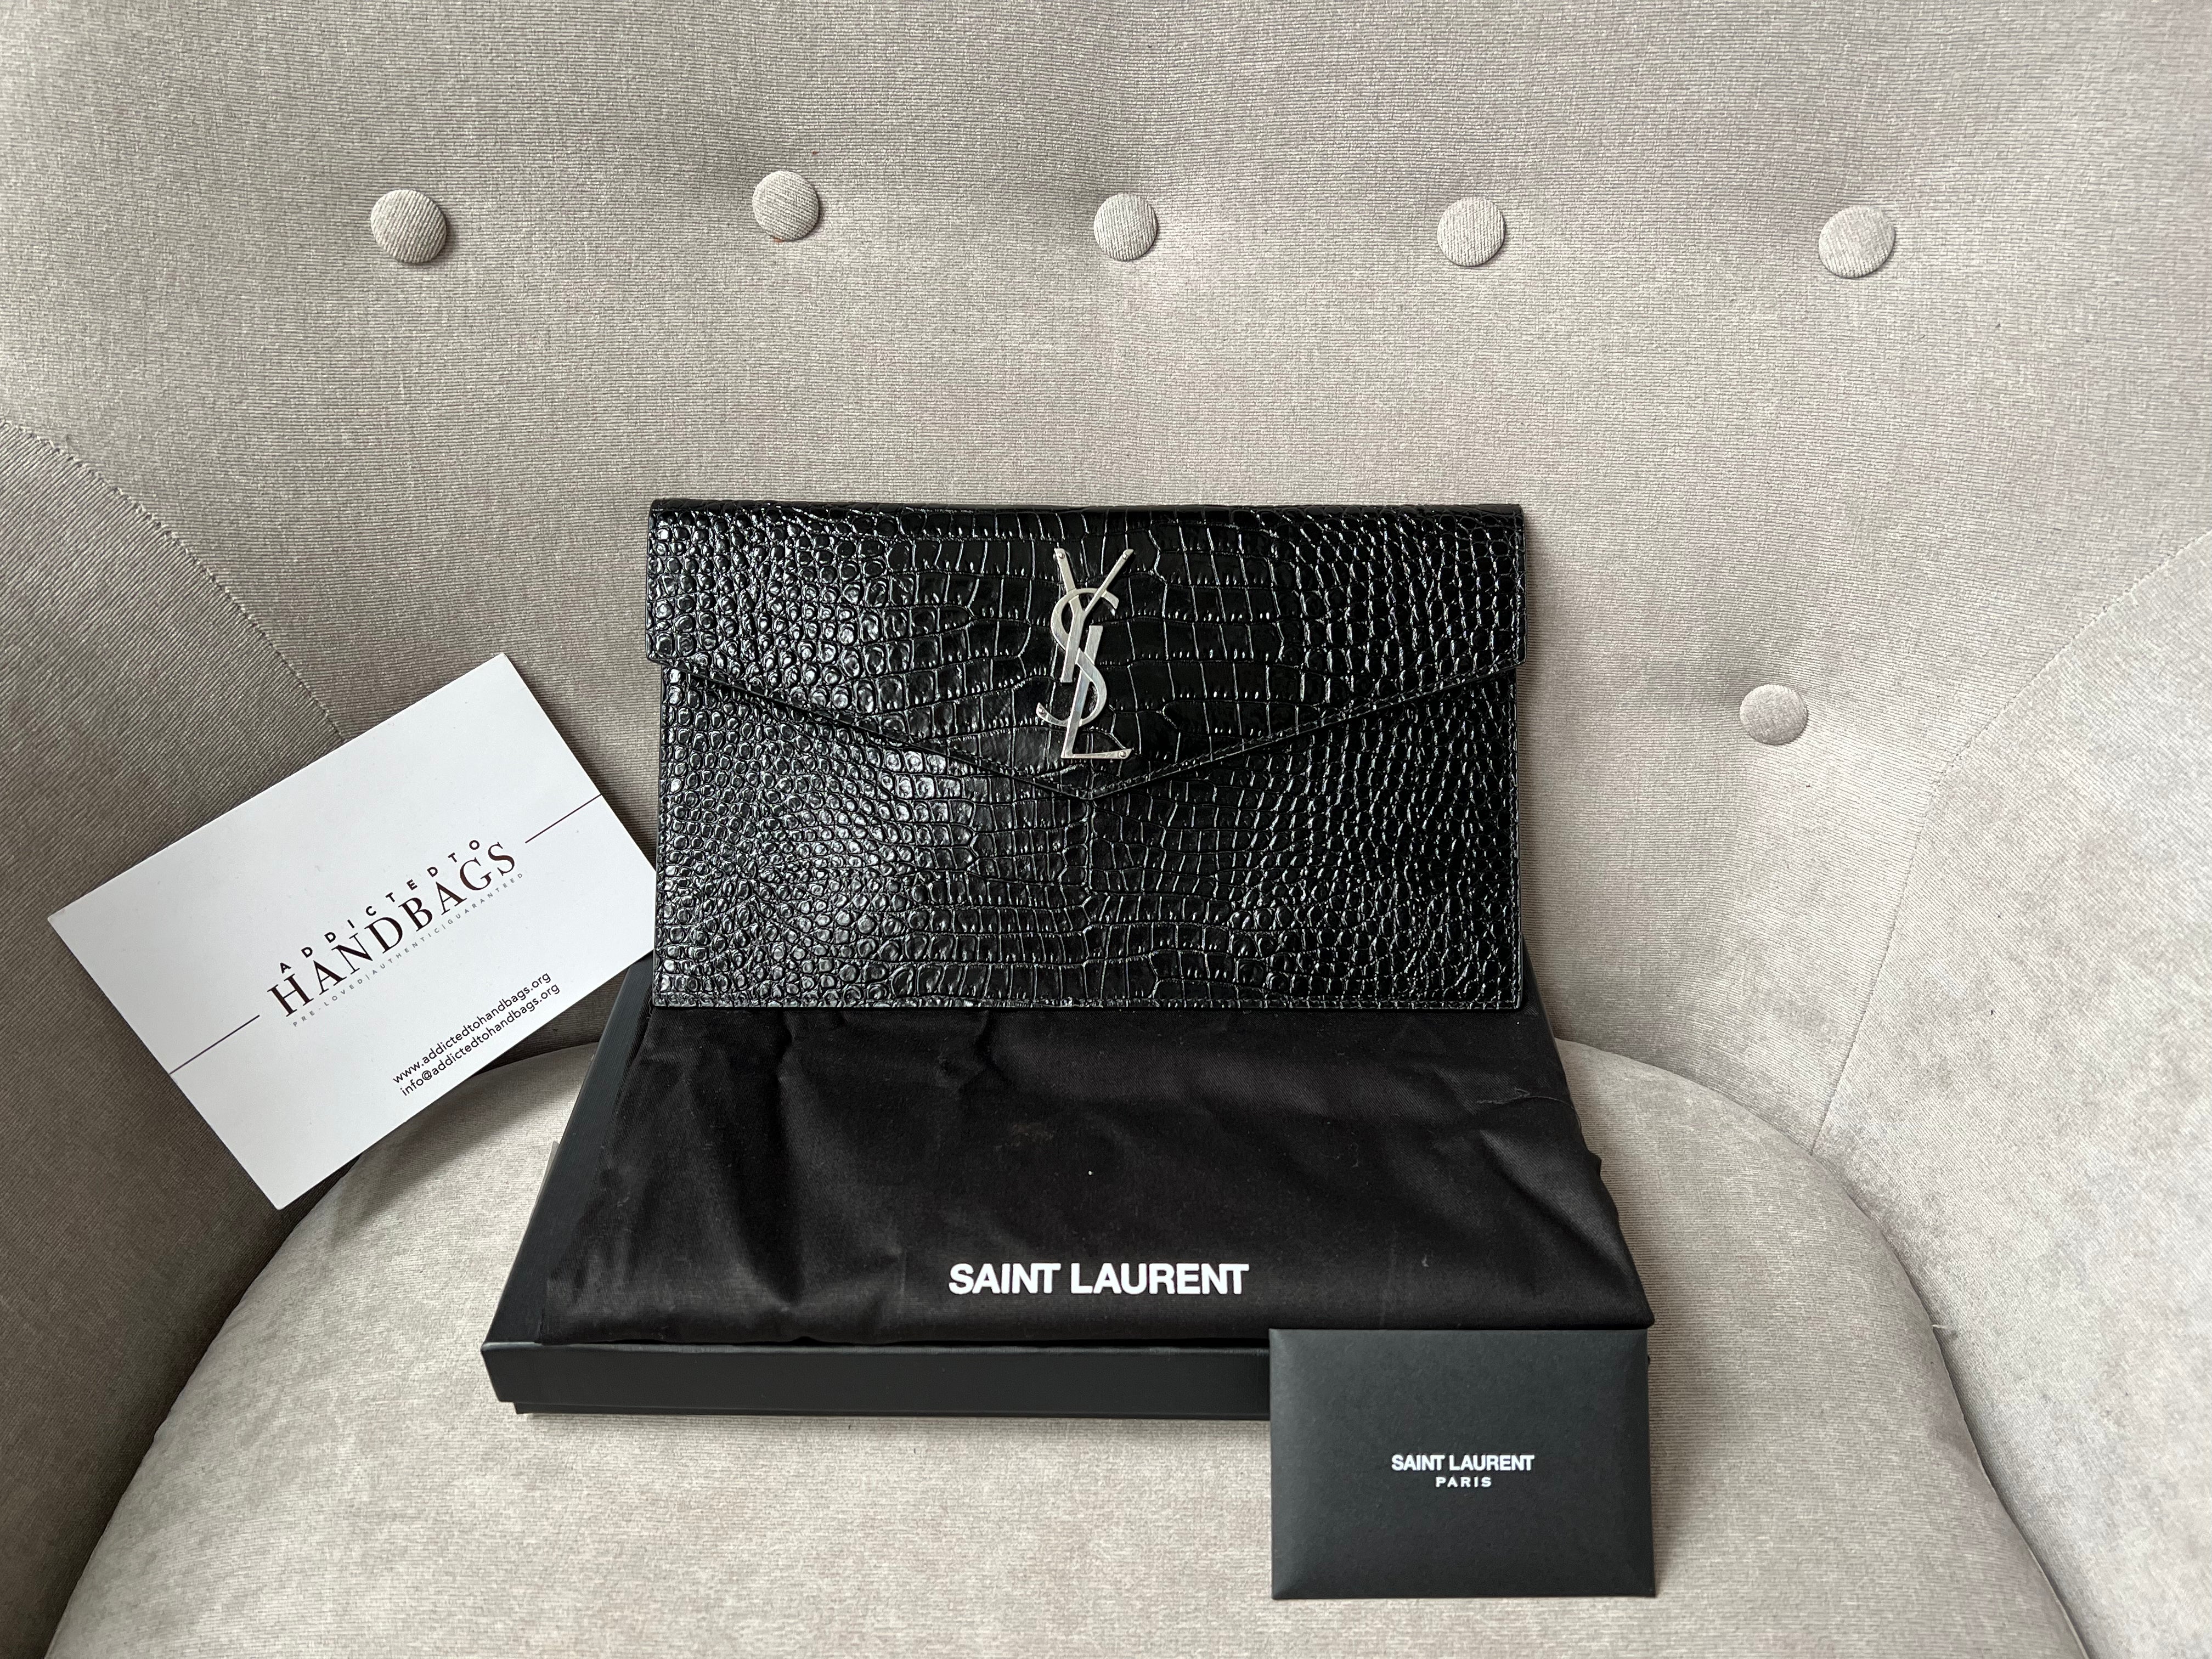 YSL UPTOWN POUCH IN CROCODILE EMBOSSED SHINY LEATHER